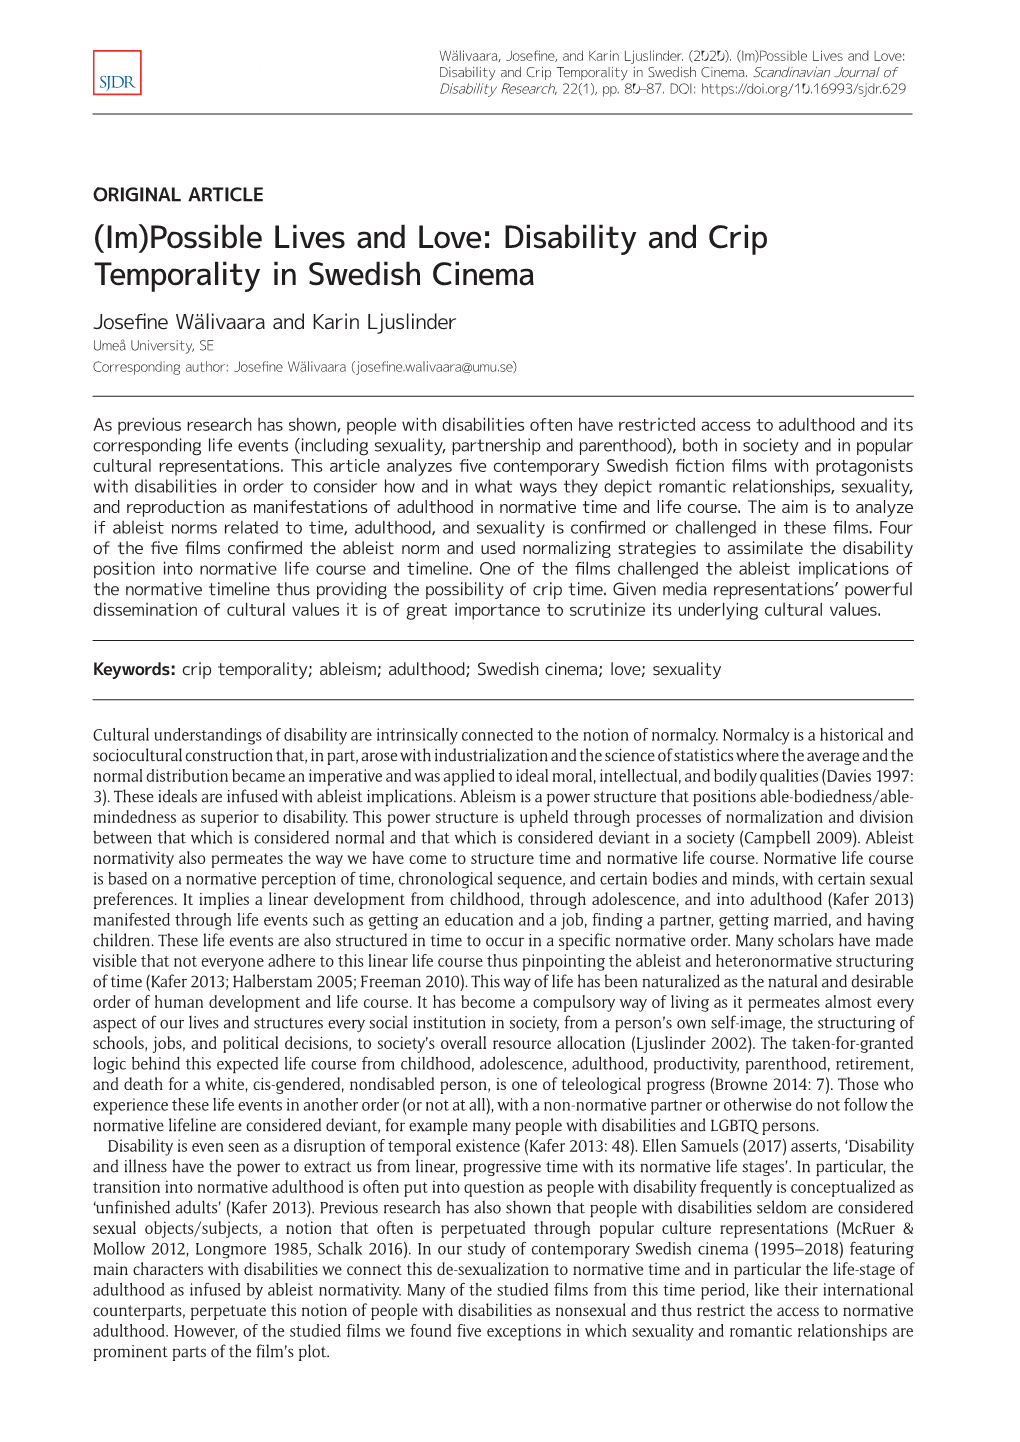 Disability and Crip Temporality in Swedish Cinema